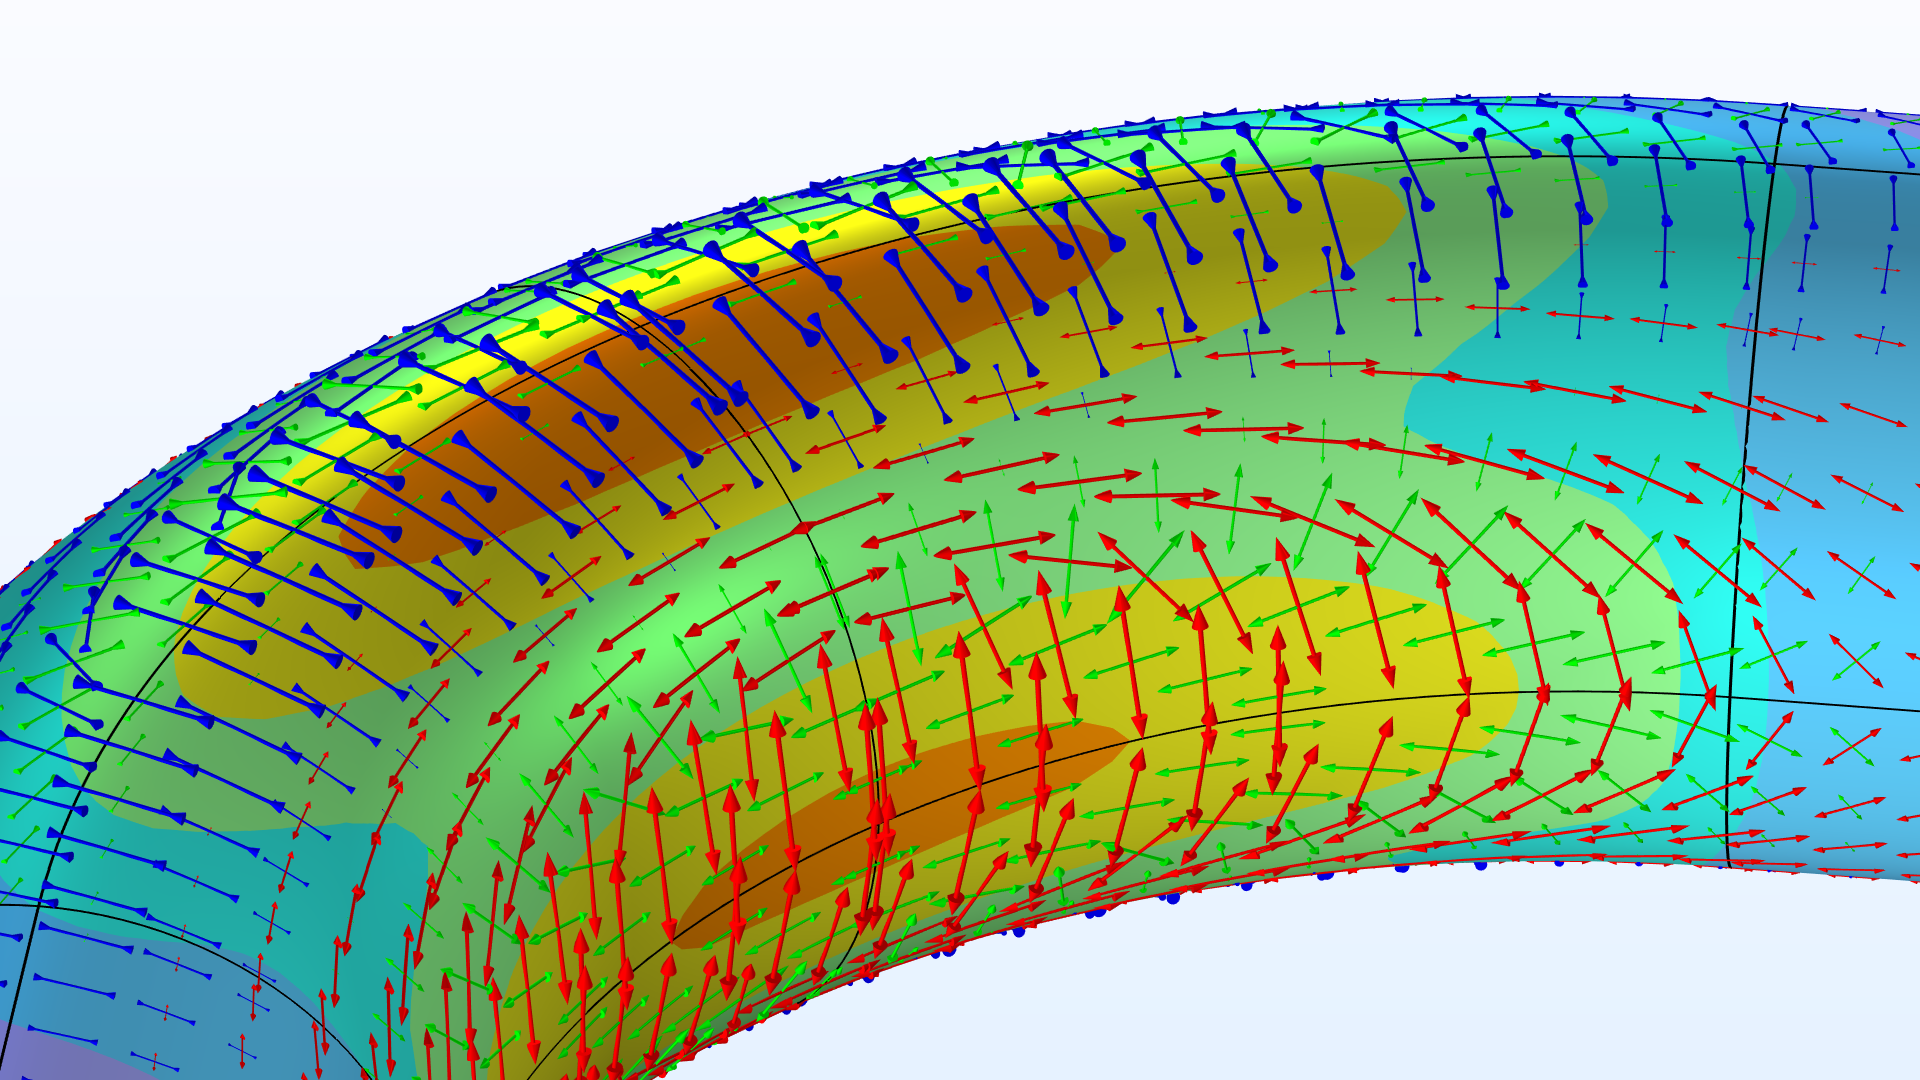 A close-up view of the pipe bend showing the Von Mises stress and principal stresses for a wall thickness of 10 percent.